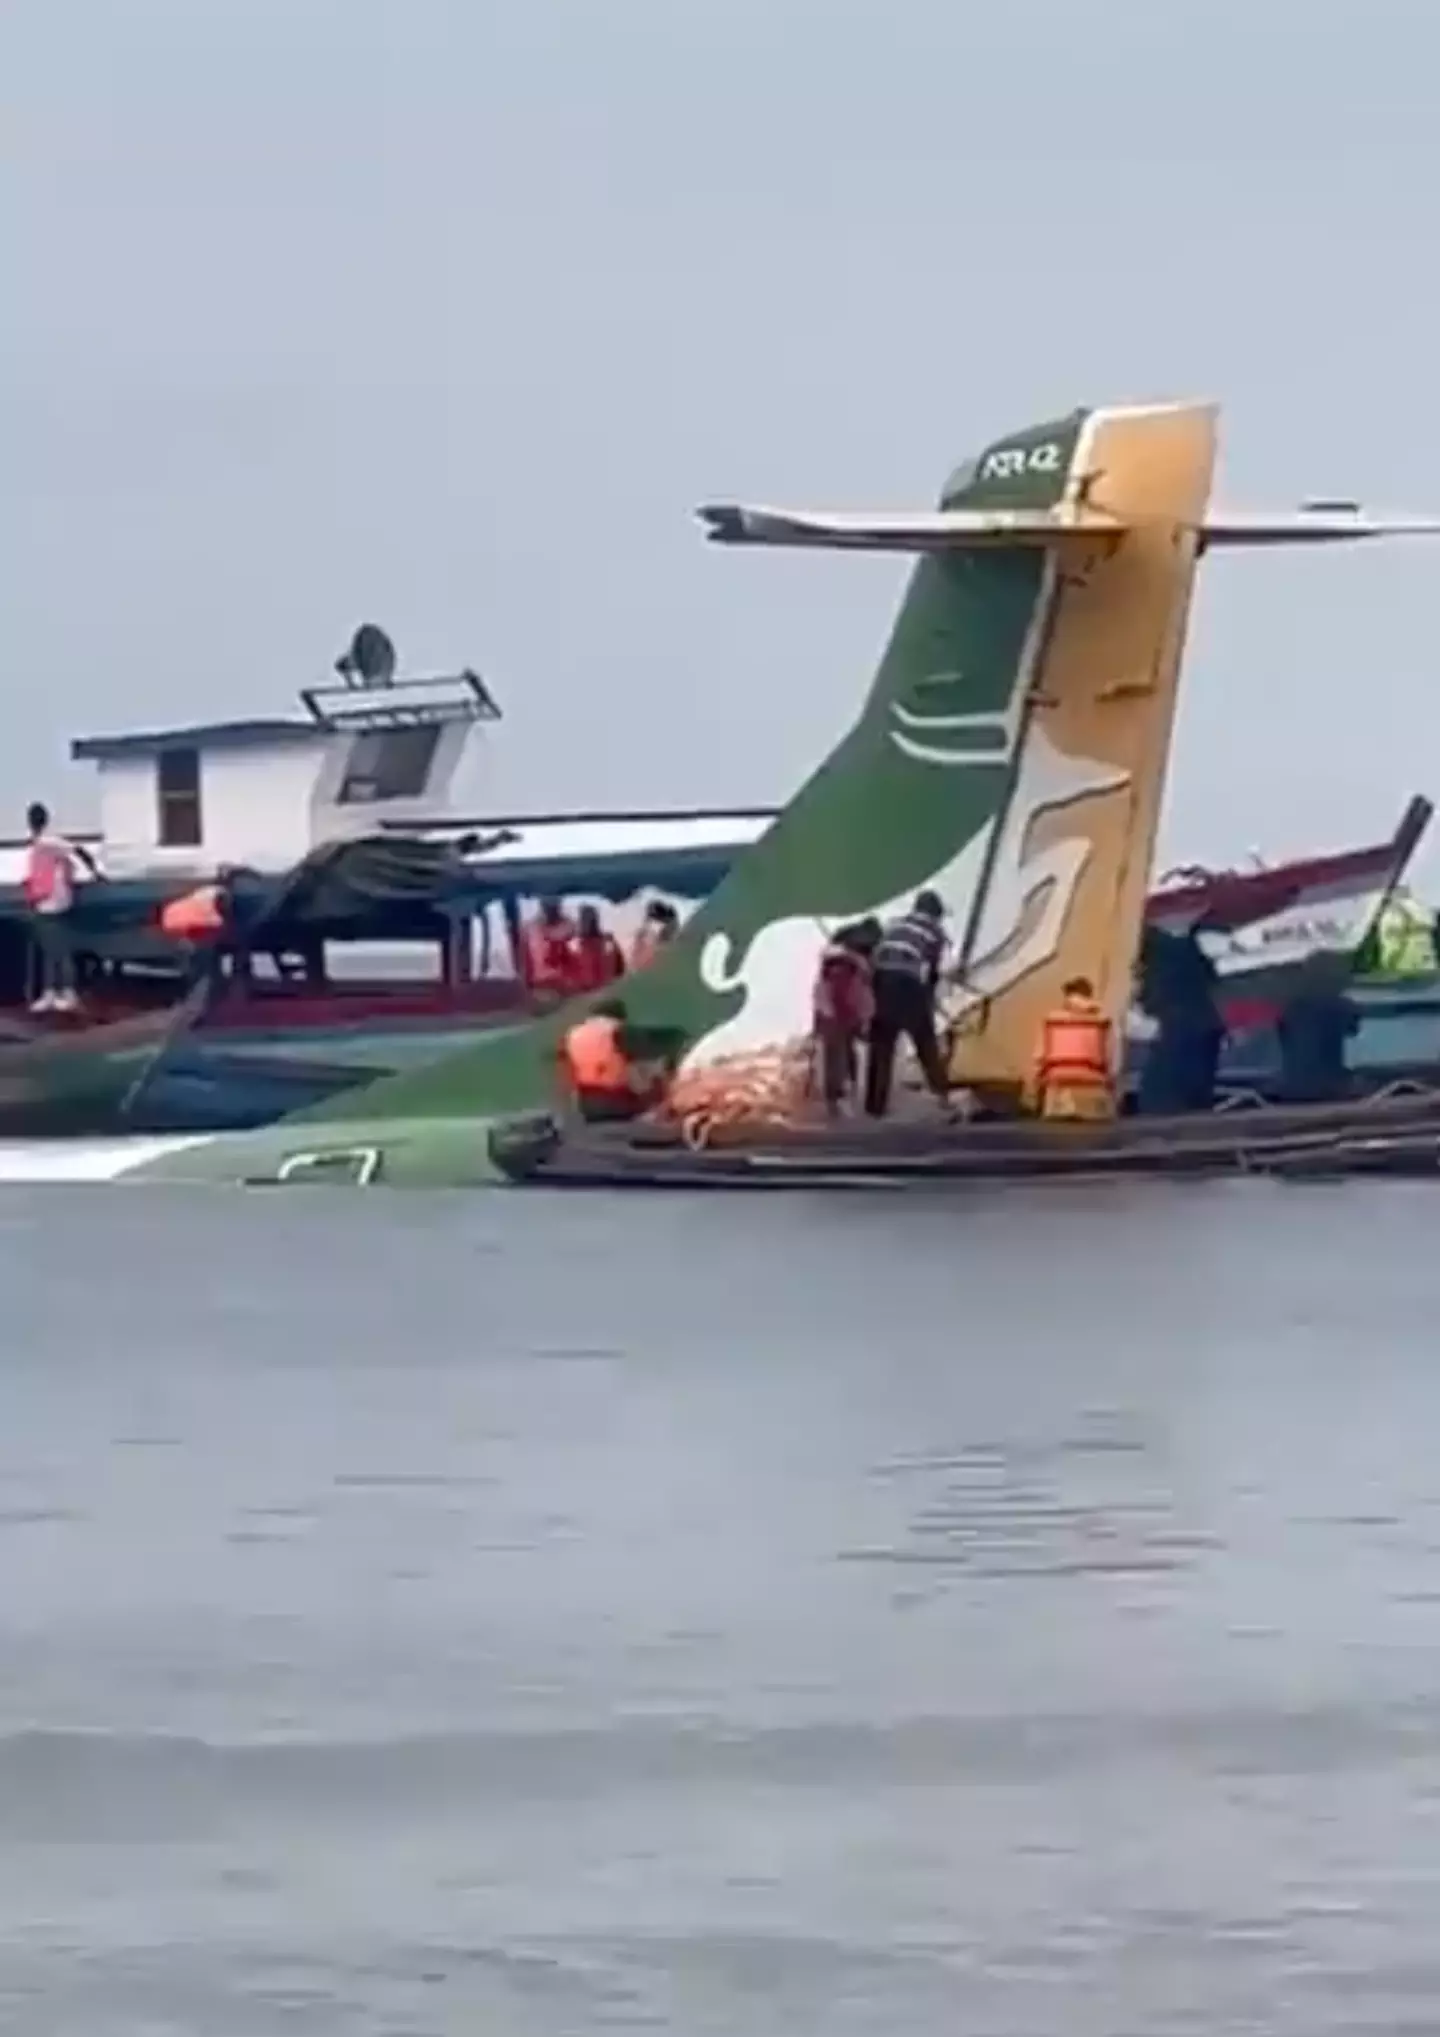 The Precision Air flight crashed into Lake Victoria today.